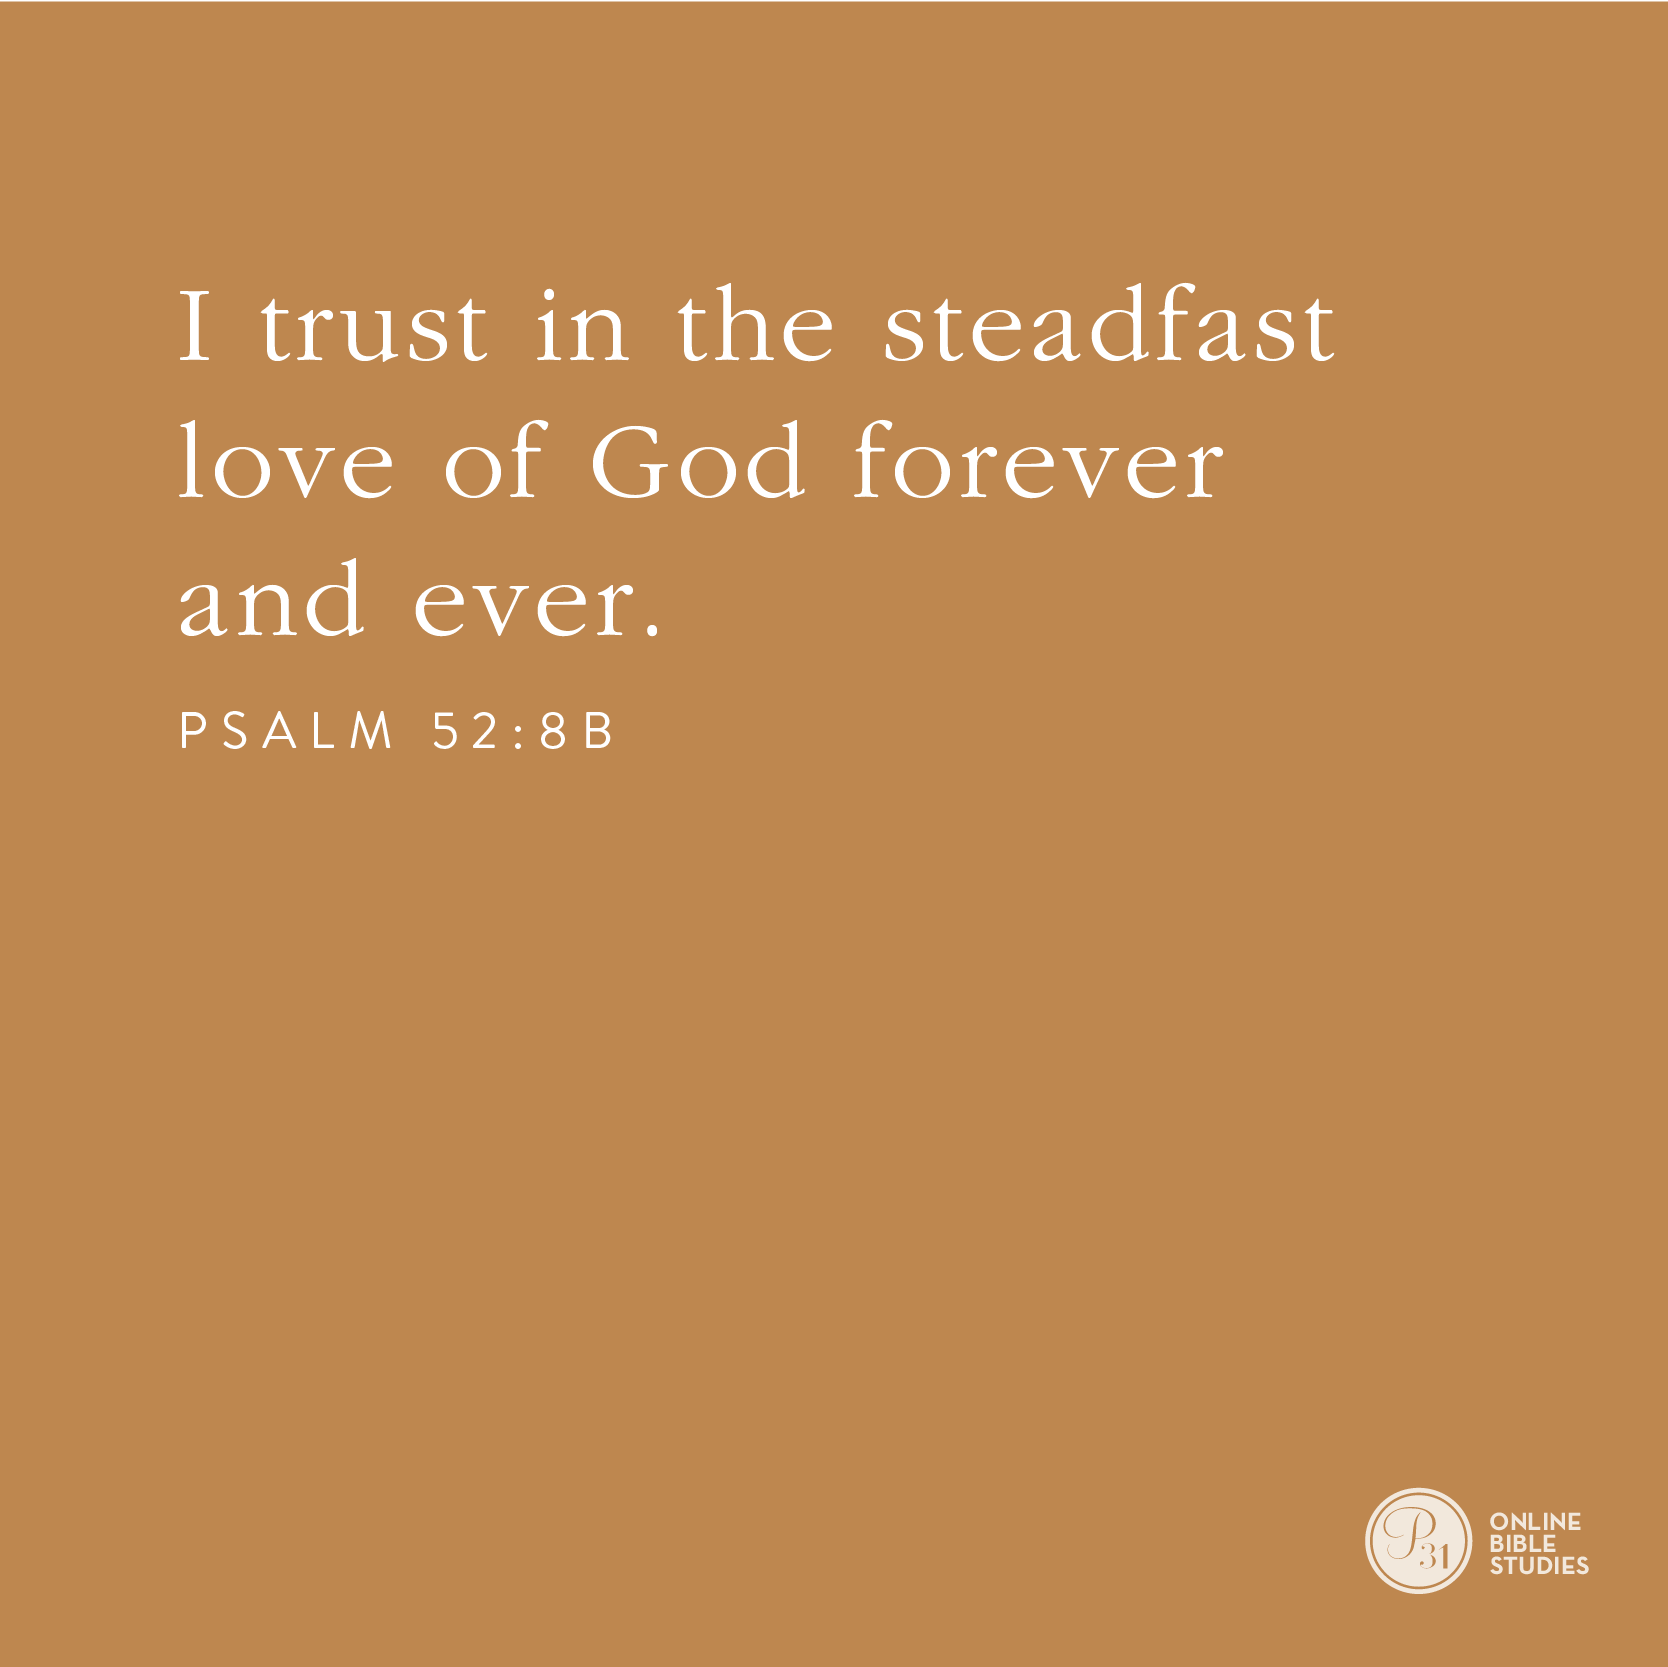 PSALM 52:8b | "I trust in the steadfast love of God forever and ever." | Proverbs 31 Online Bible Studies | Week 2 Verse |  #TrustworthyStudy #P31OBS